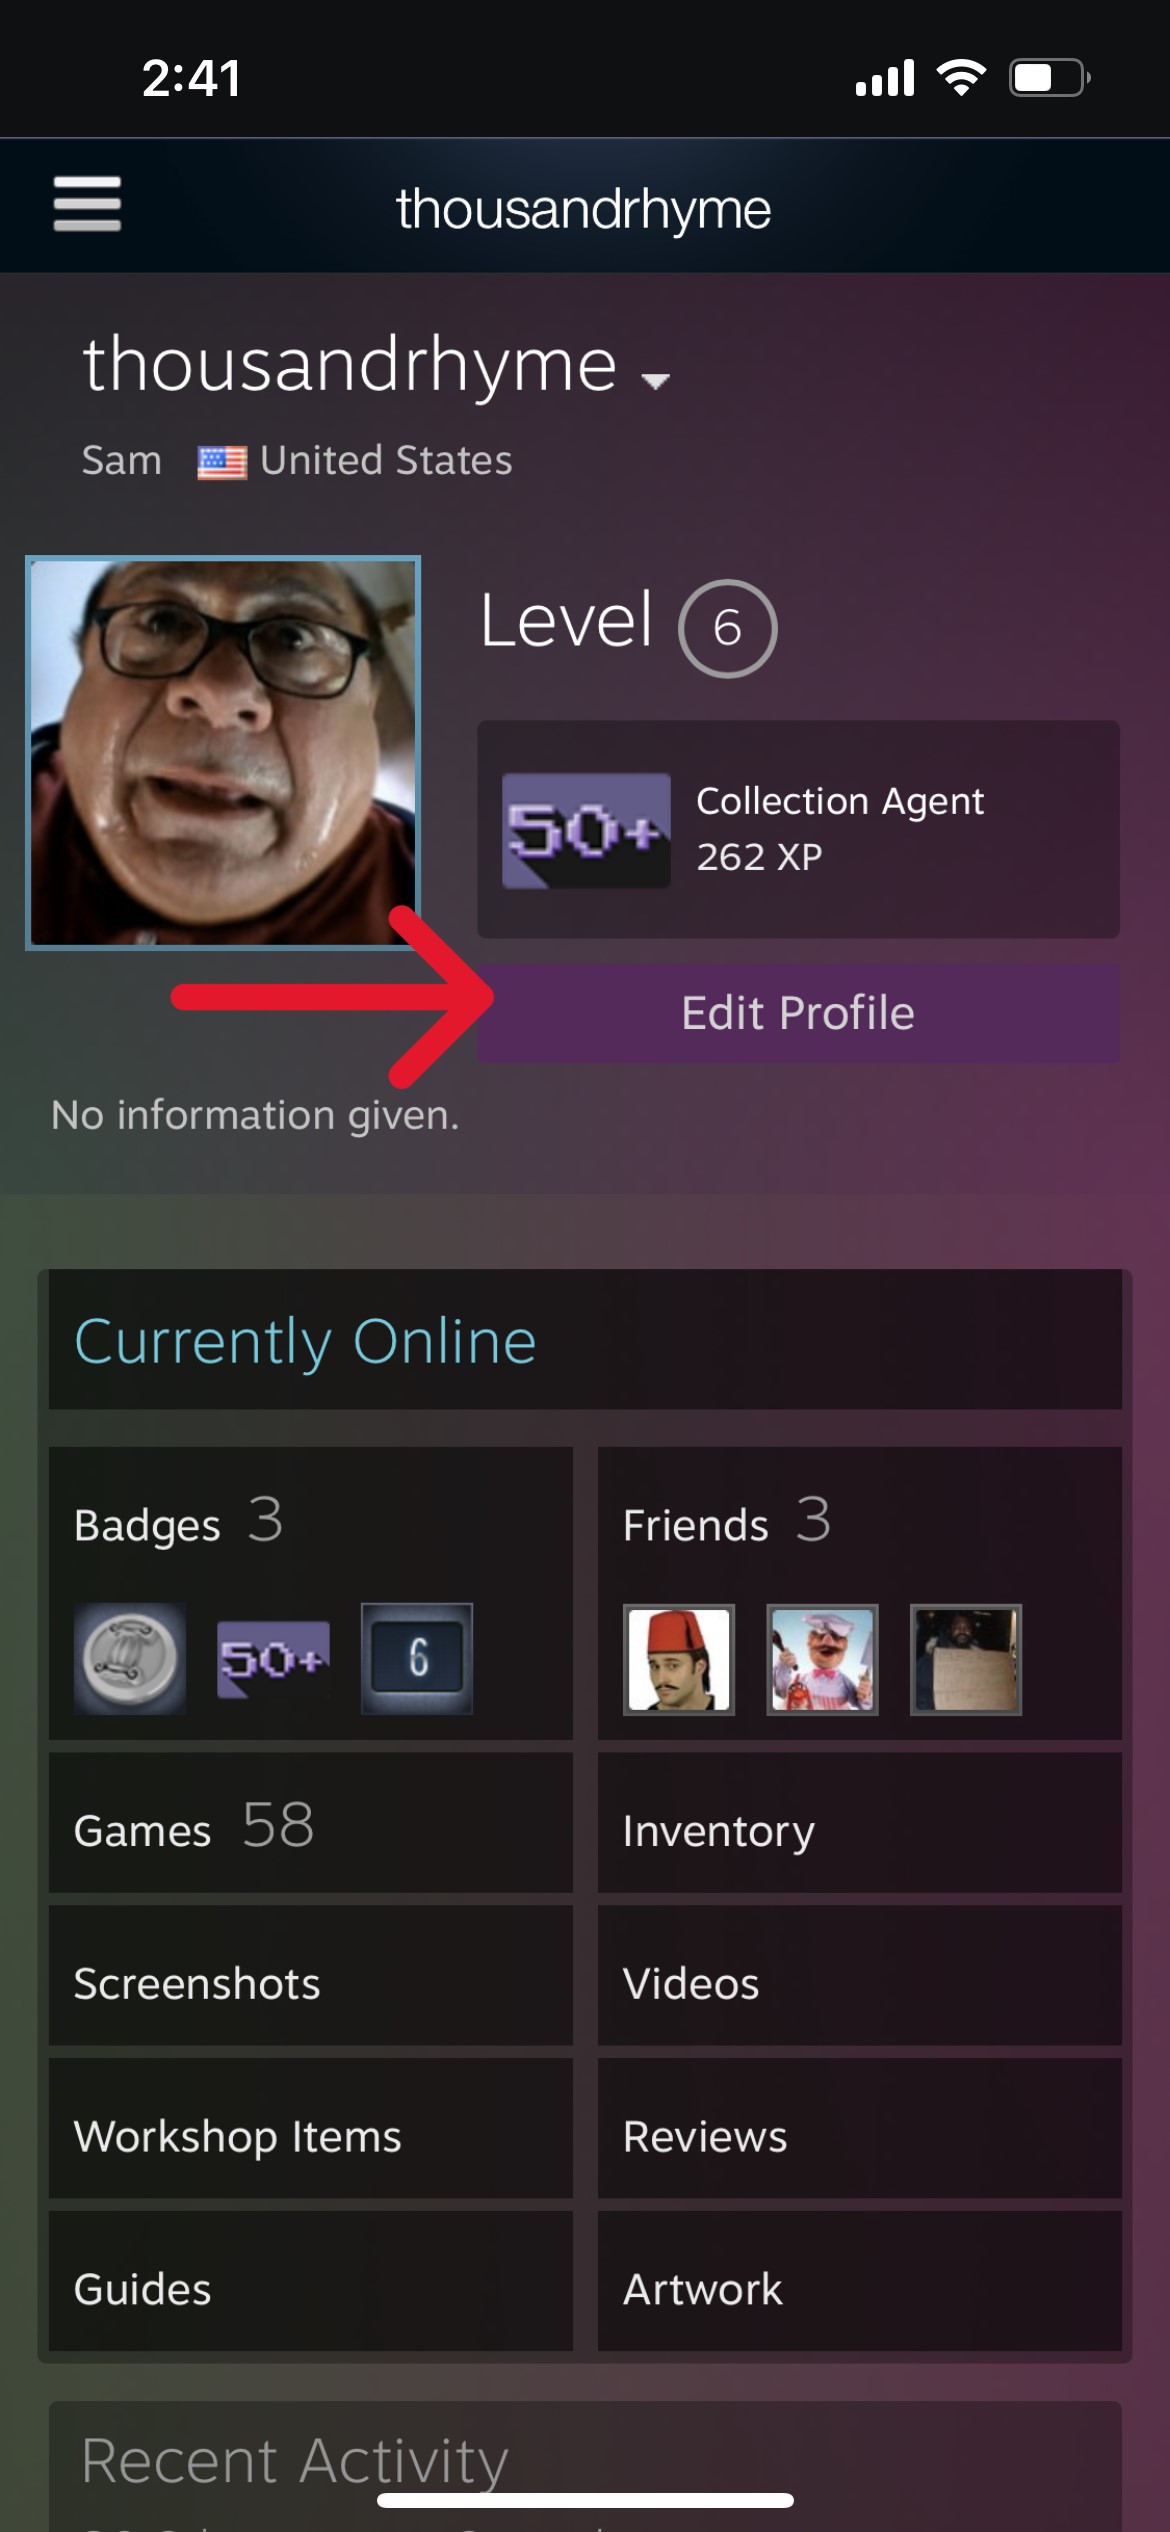 How to Rename your Steam ID or Steam Community ID? 